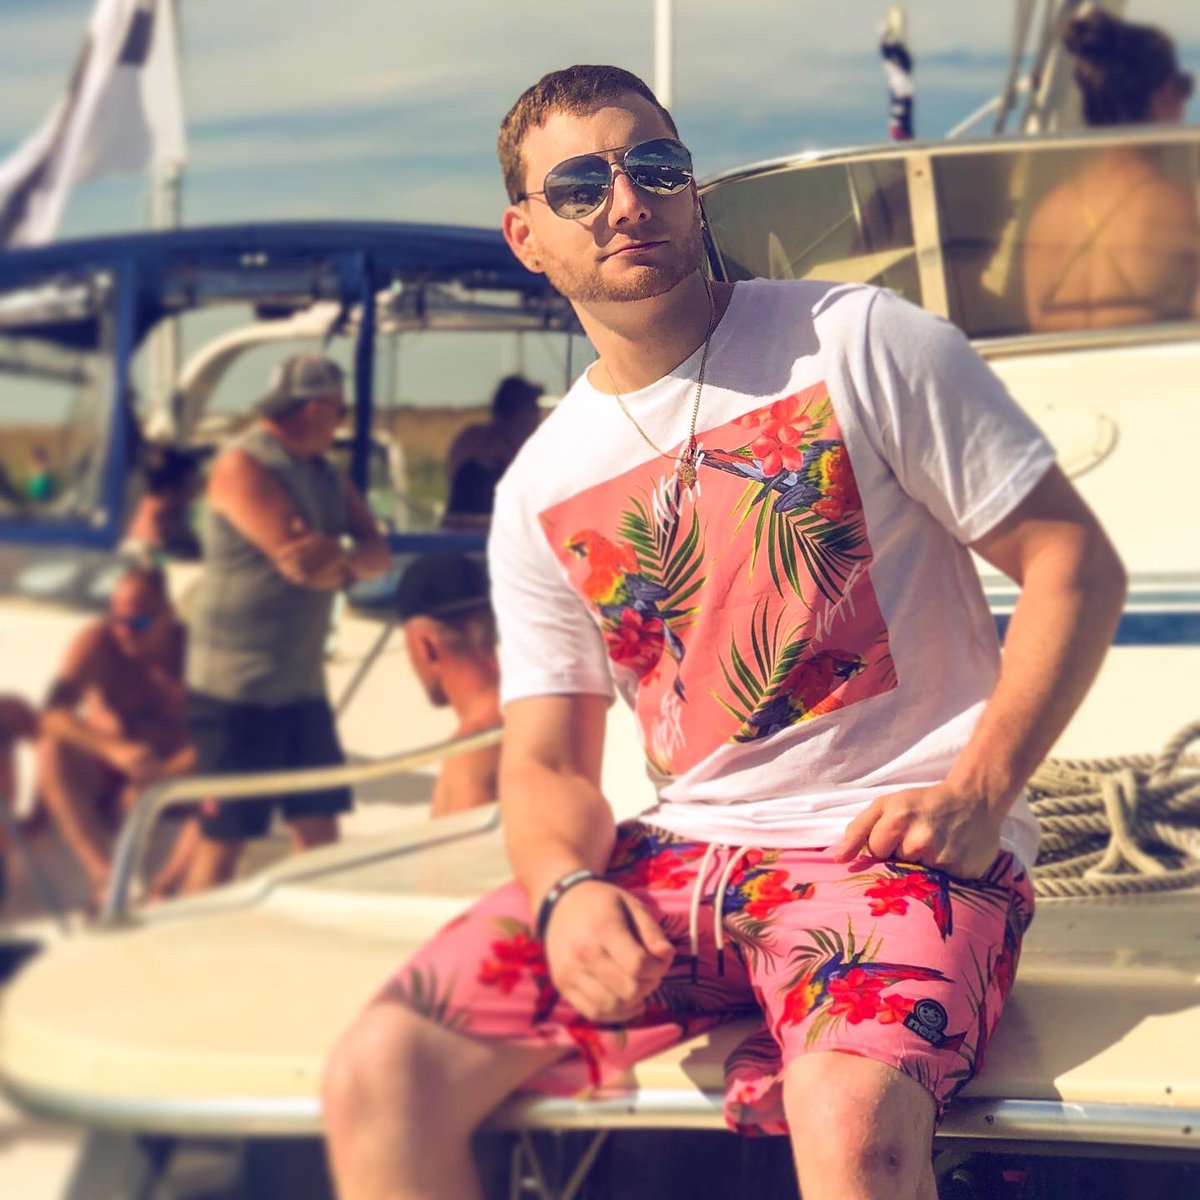 Mannn...I been makin cheap outfits look moderately affordable since forever 🤣 MAJOR shout out to my guy sunscreen for holdin me down ☀️⛵️ Real Speech©️
#boat #michigan #party #muscamootbay